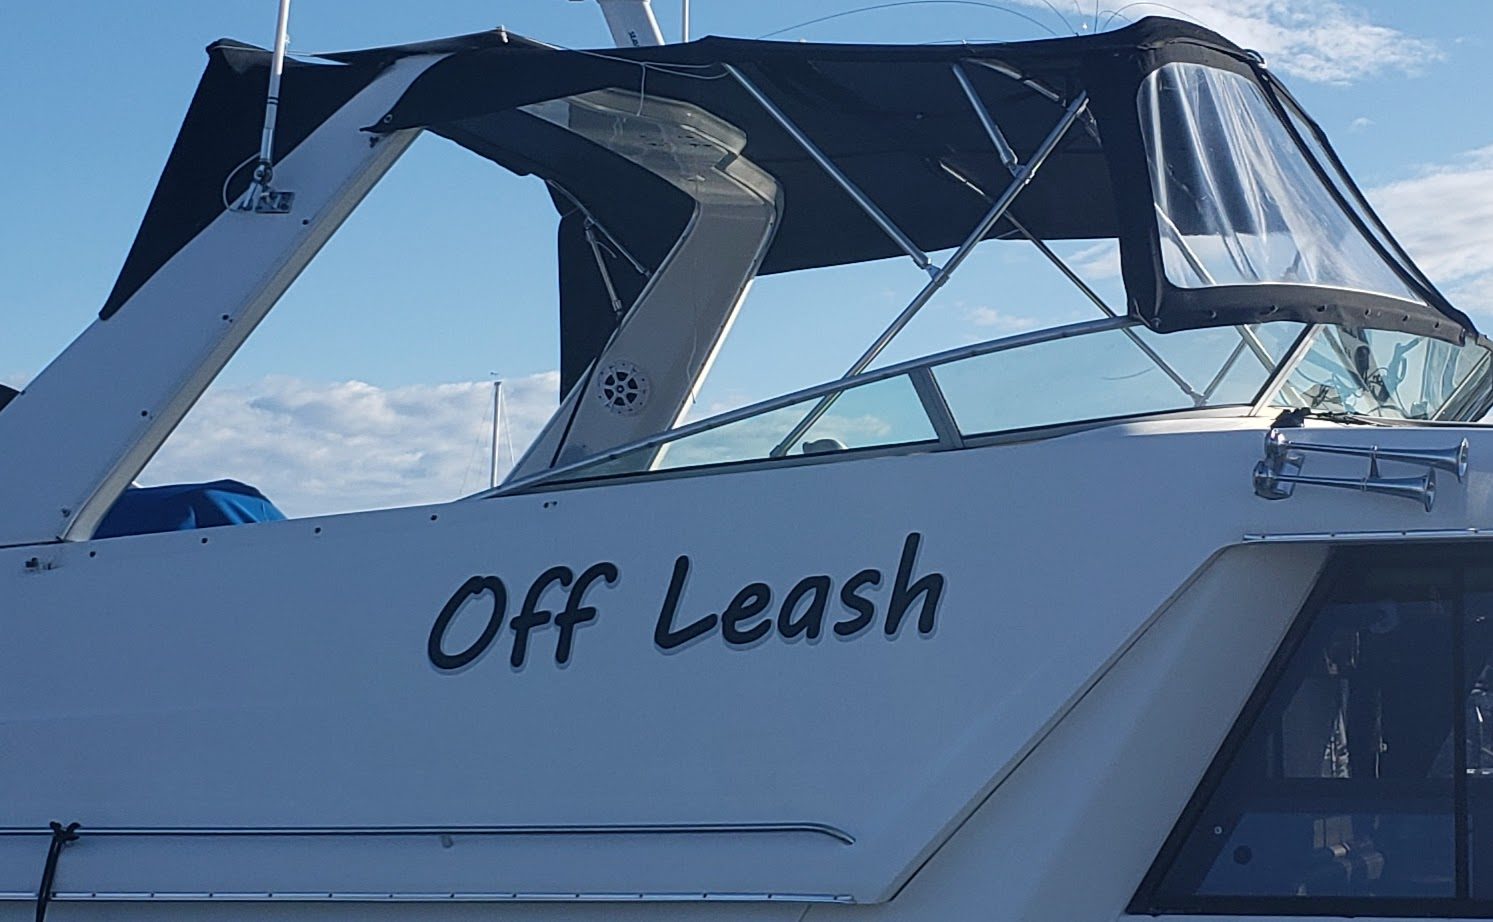 Name on the sides of the boat